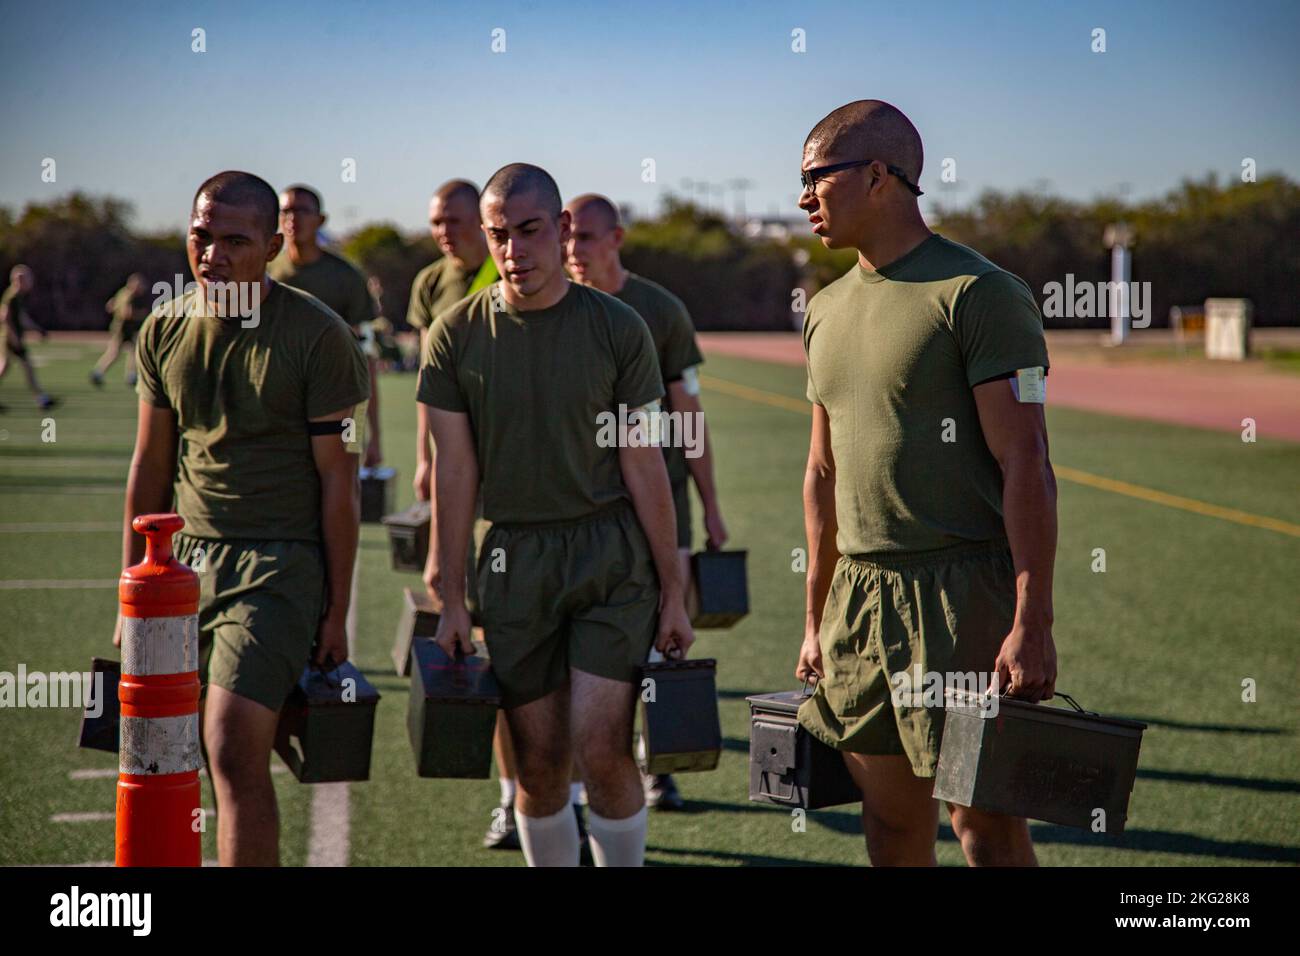 U.S. Marines Corps recruits with Fox Company, 2nd Recruit Training Battalion, carry ammunition cans during a physical training event at Marine Corps Recruit Depot San Diego, Oct. 25, 2022. Physical training is conducted regularly throughout recruit training to ensure physical readiness within the companies. Stock Photo